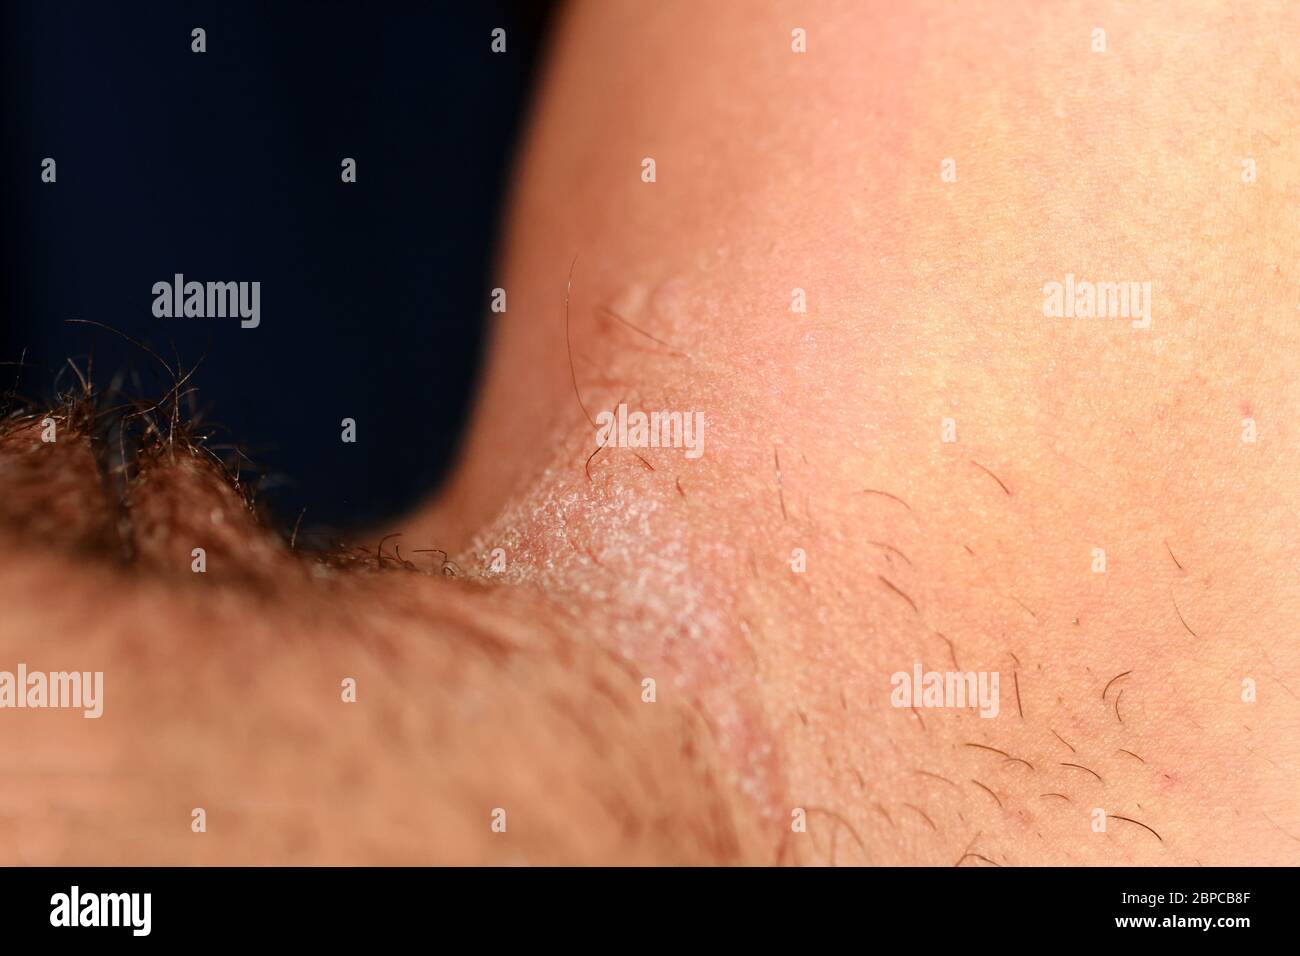 Fungal infection in the groin, Psoriasis, dermatitis, eczema. Stock Photo